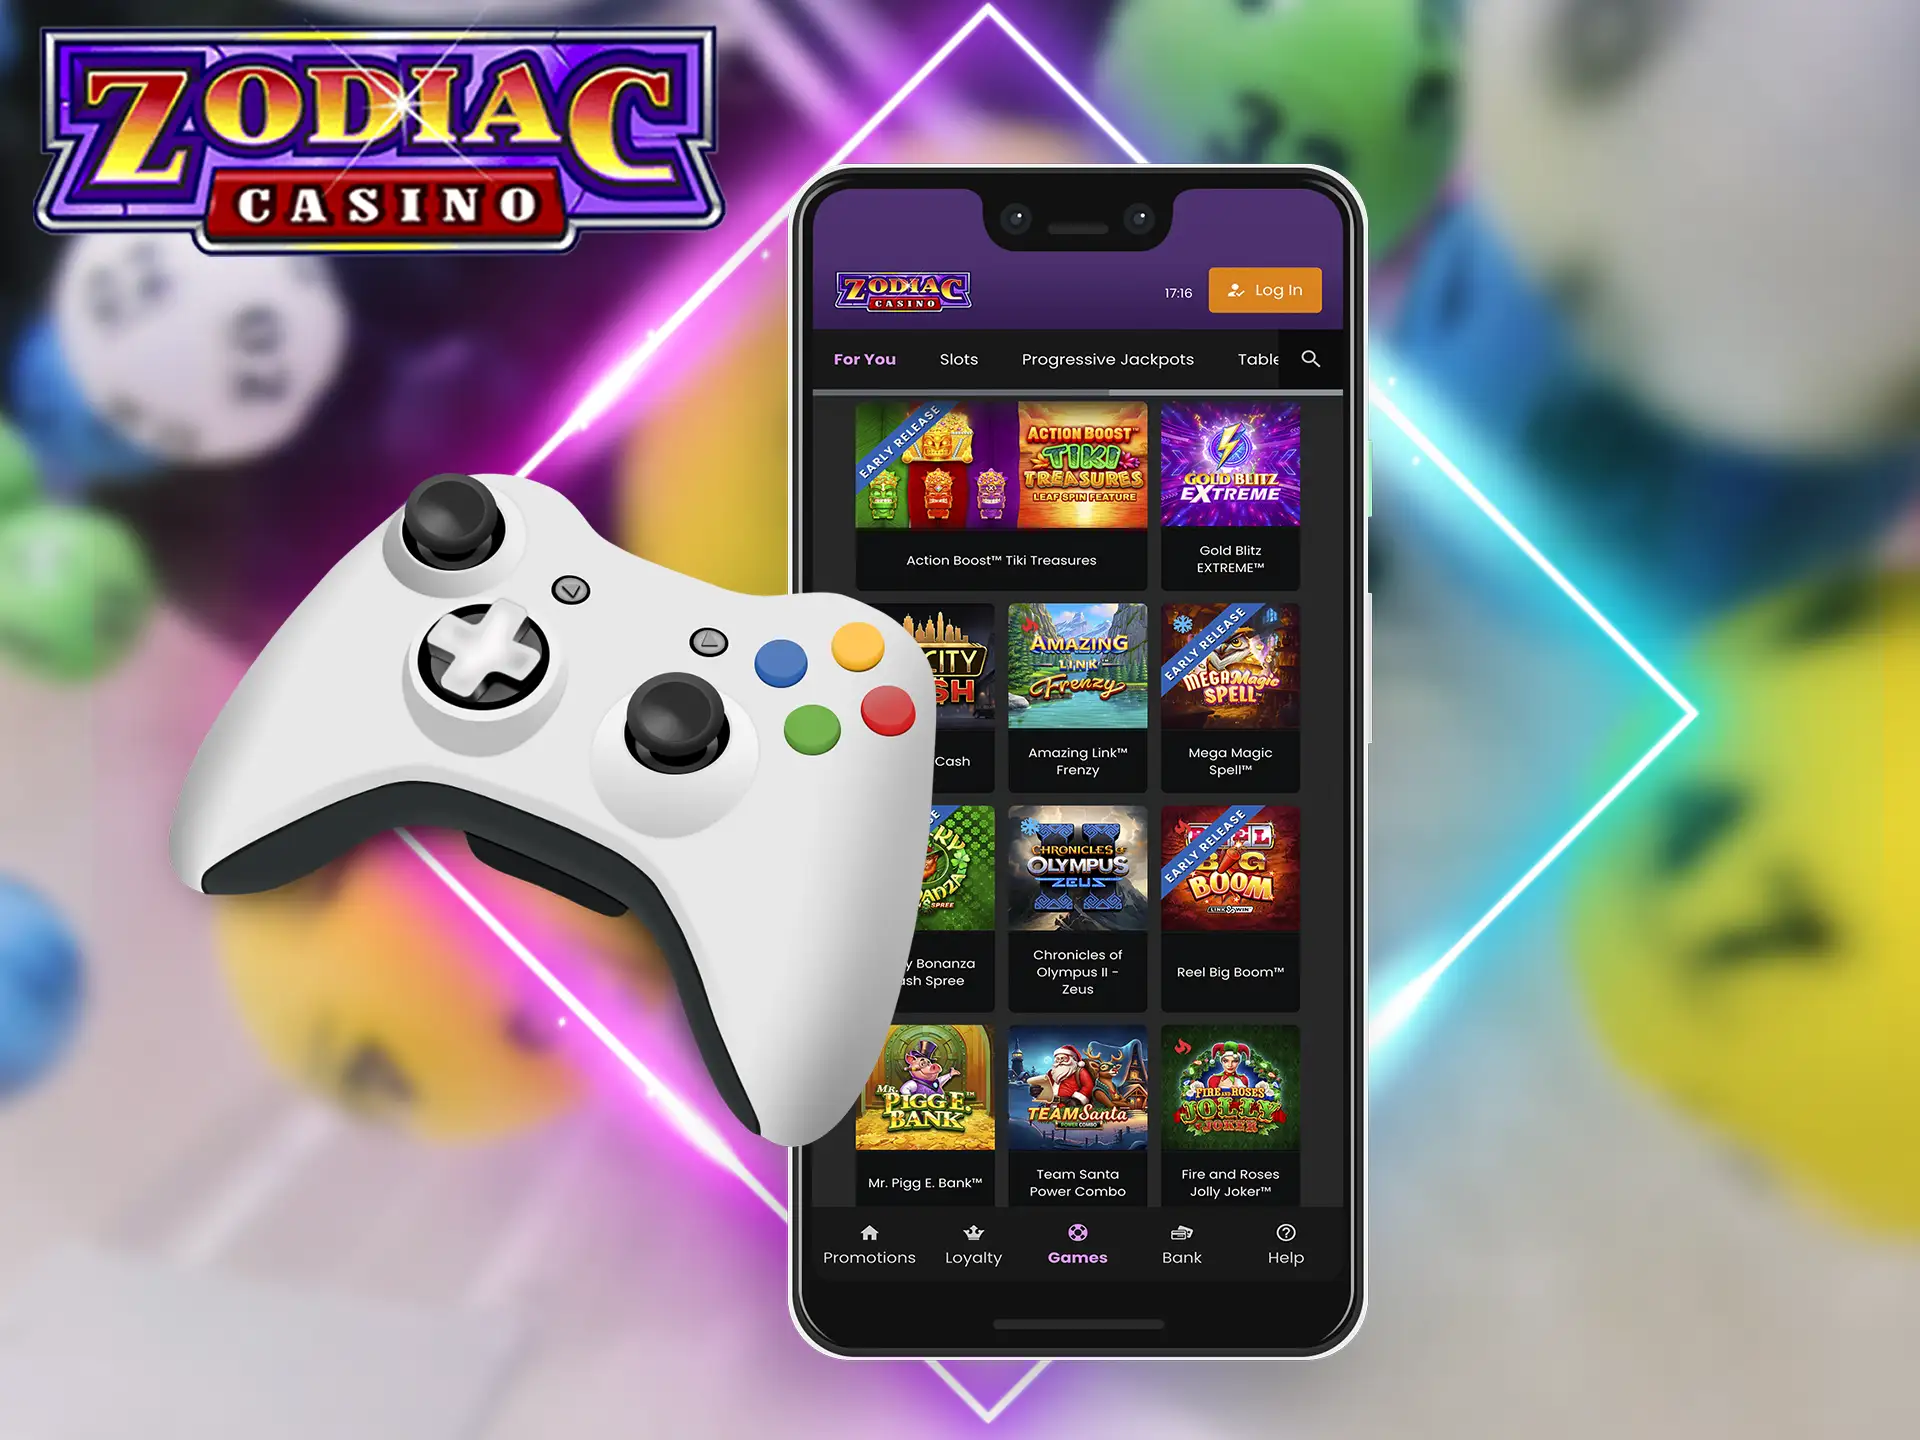 You will find only quality gambling entertainment only from proven suppliers in the app Zodiac Casino.